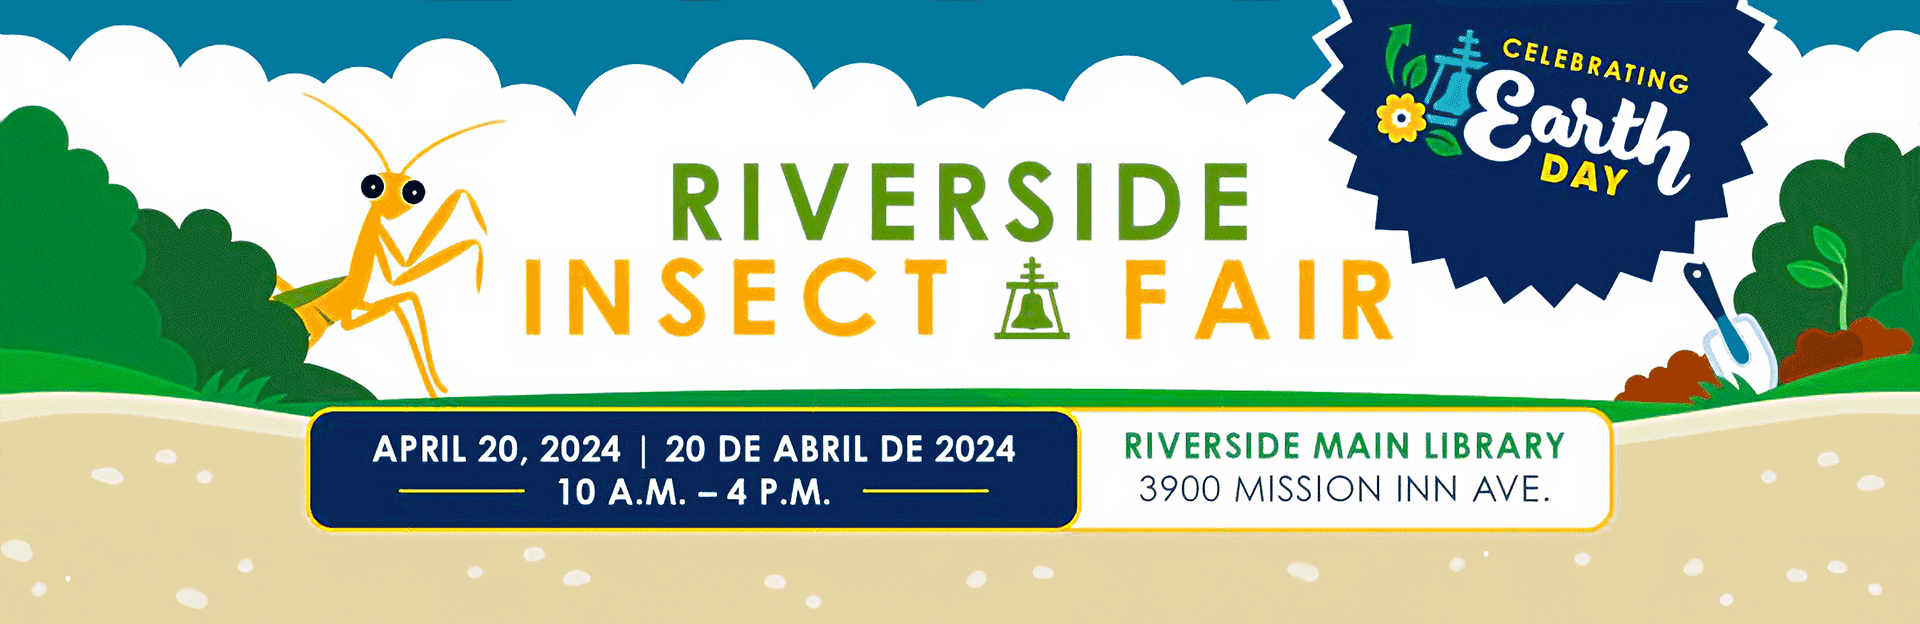 Riverside Insect Fair 2024